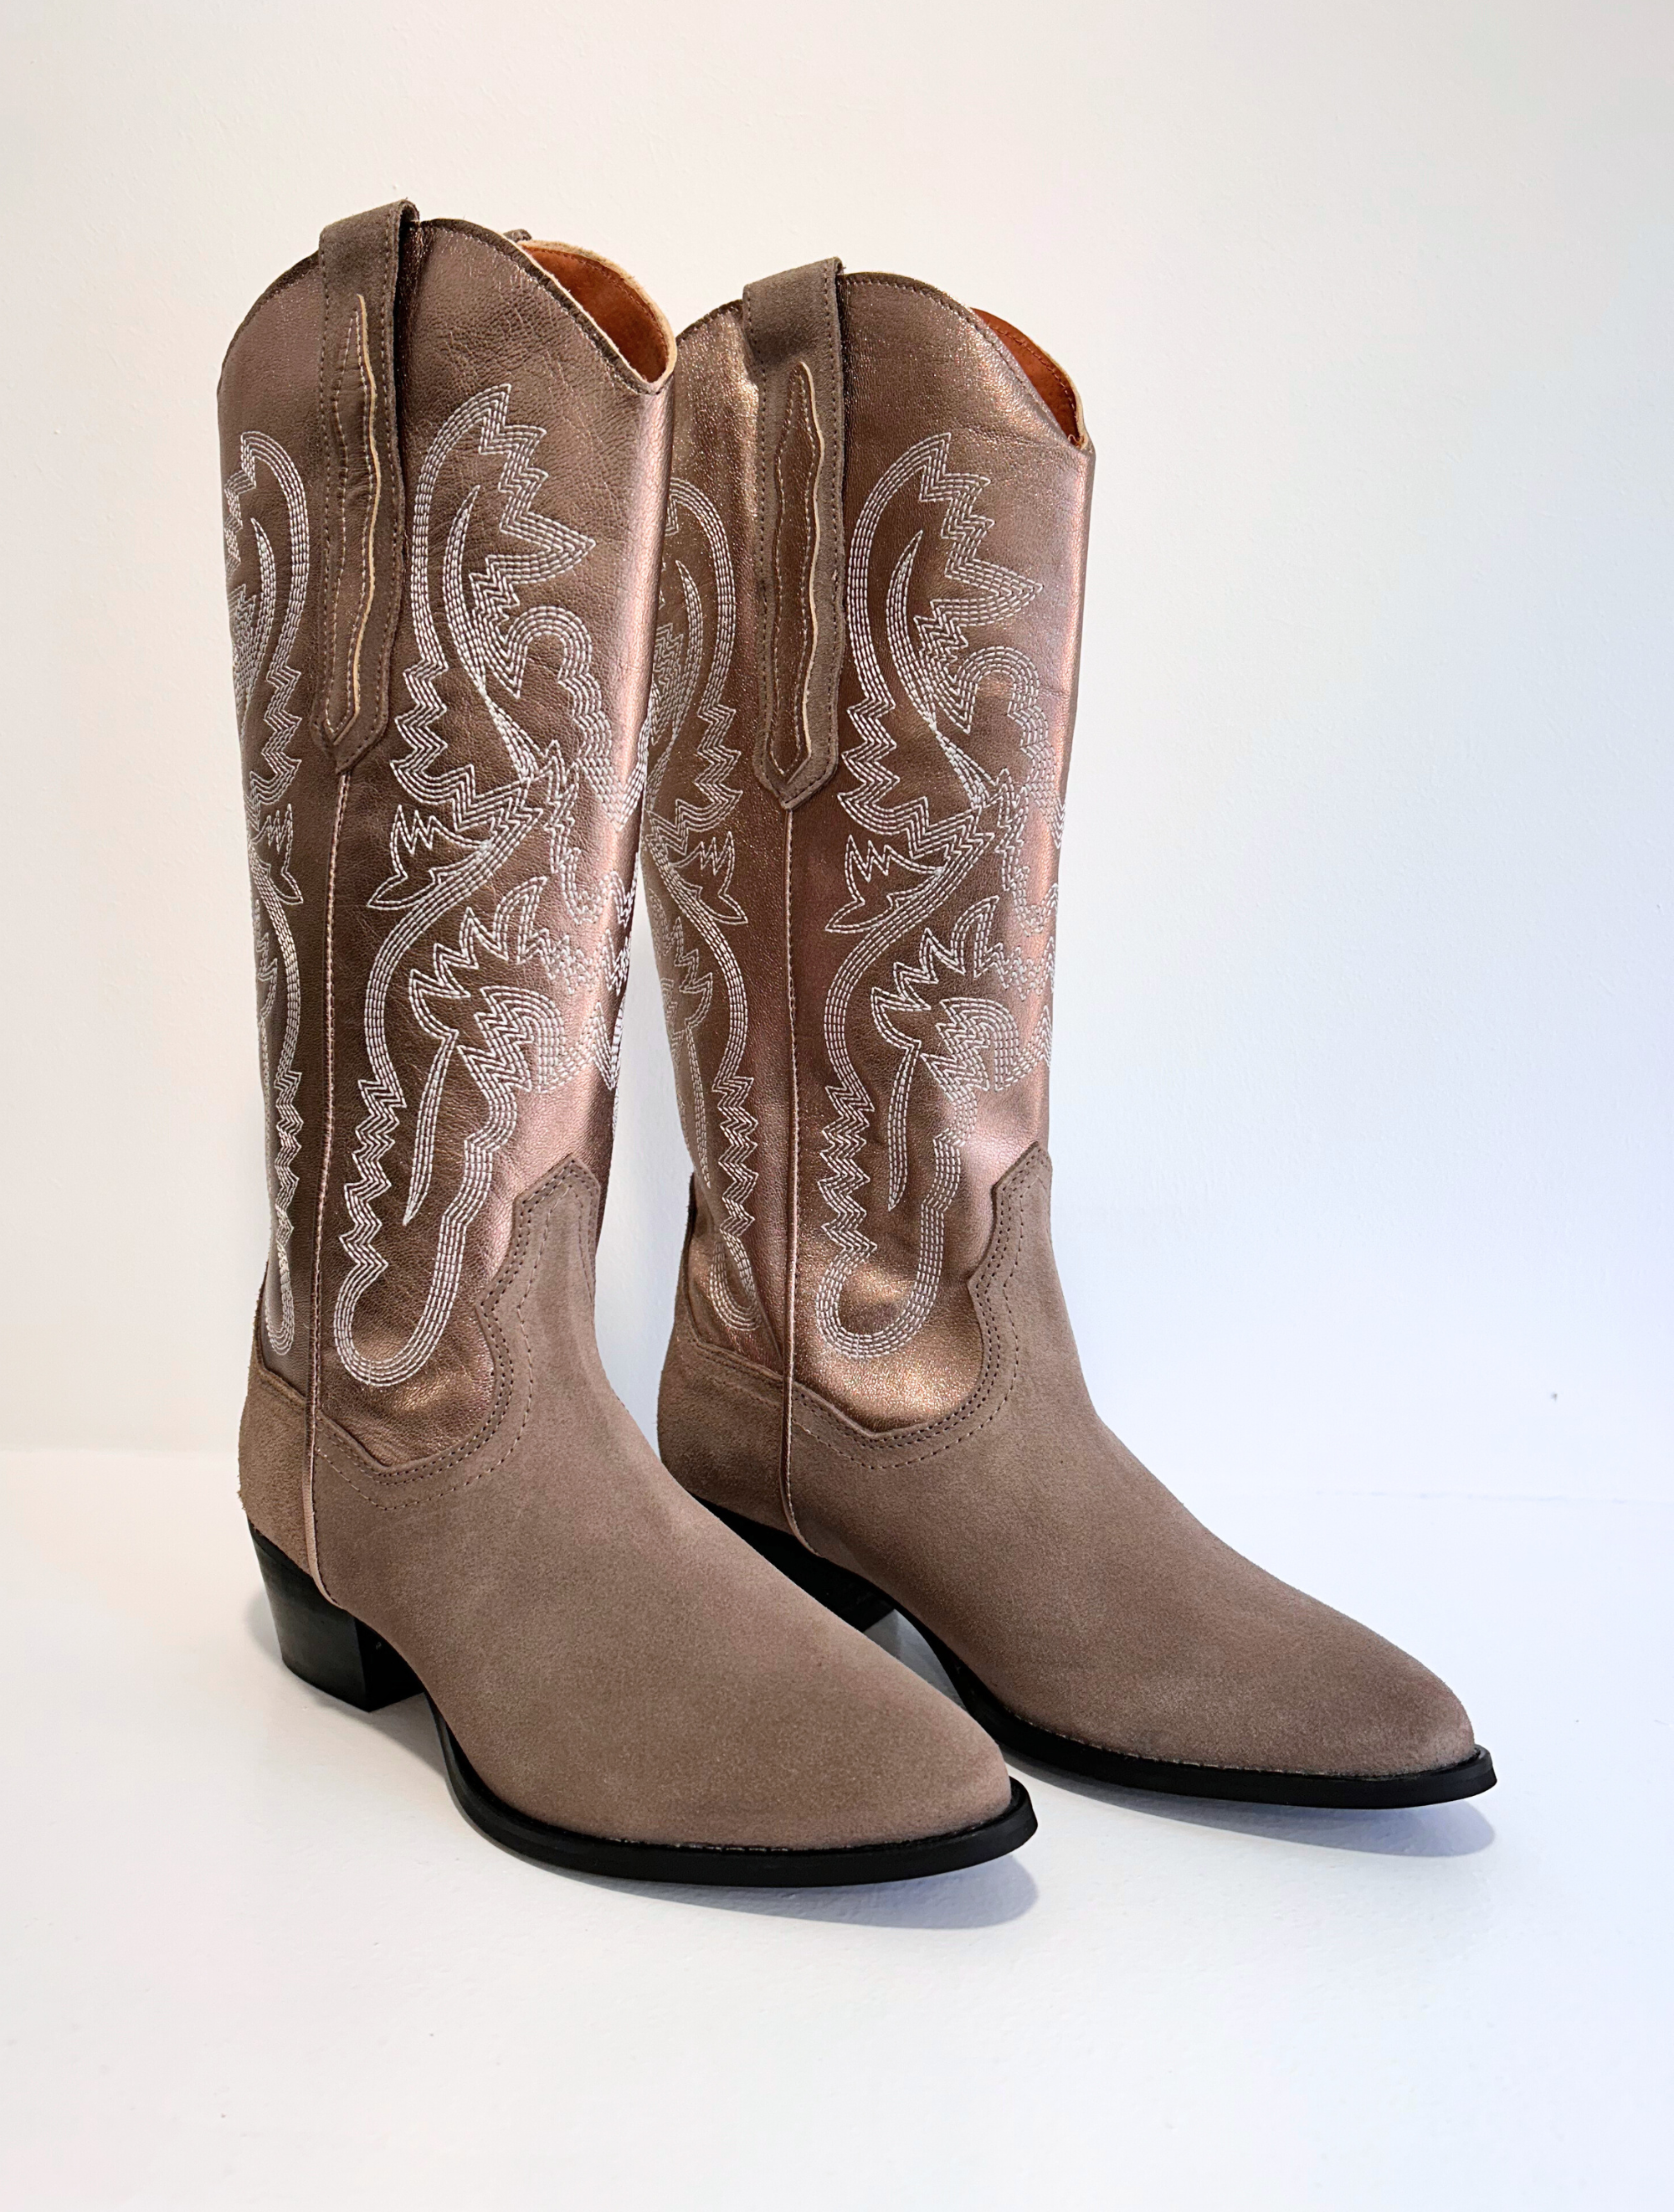 Metalic leather and beige suede mid-calf cowboy boot with contrast stitching and black wooden slanted stacked heel